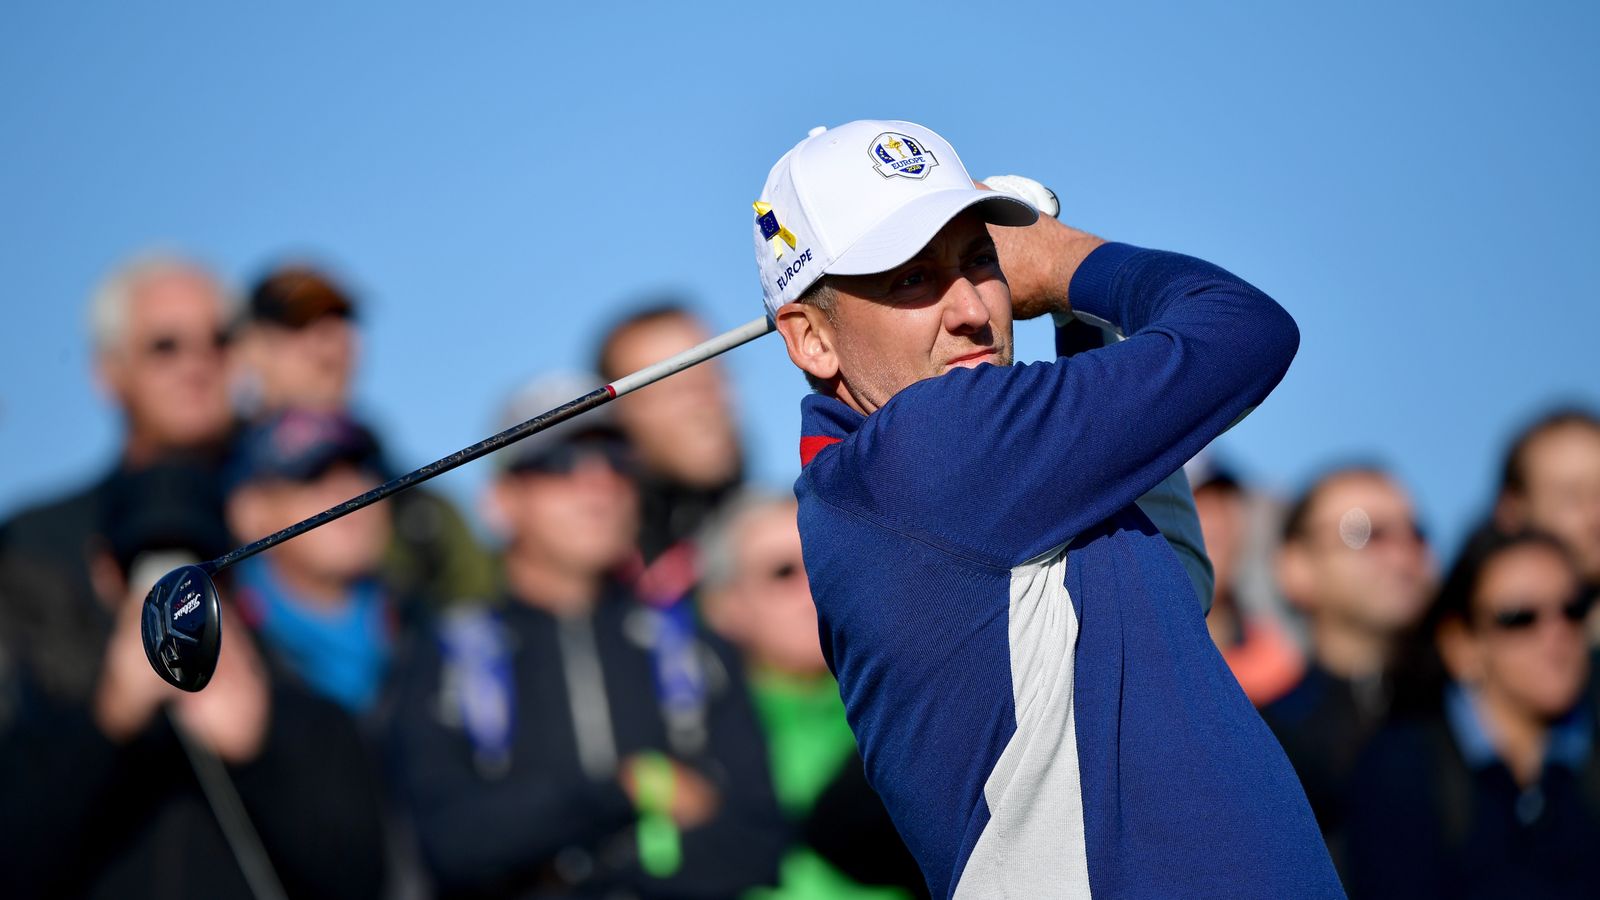 Ryder Cup Ian Poulter enjoying being a 'marked man' for Team USA